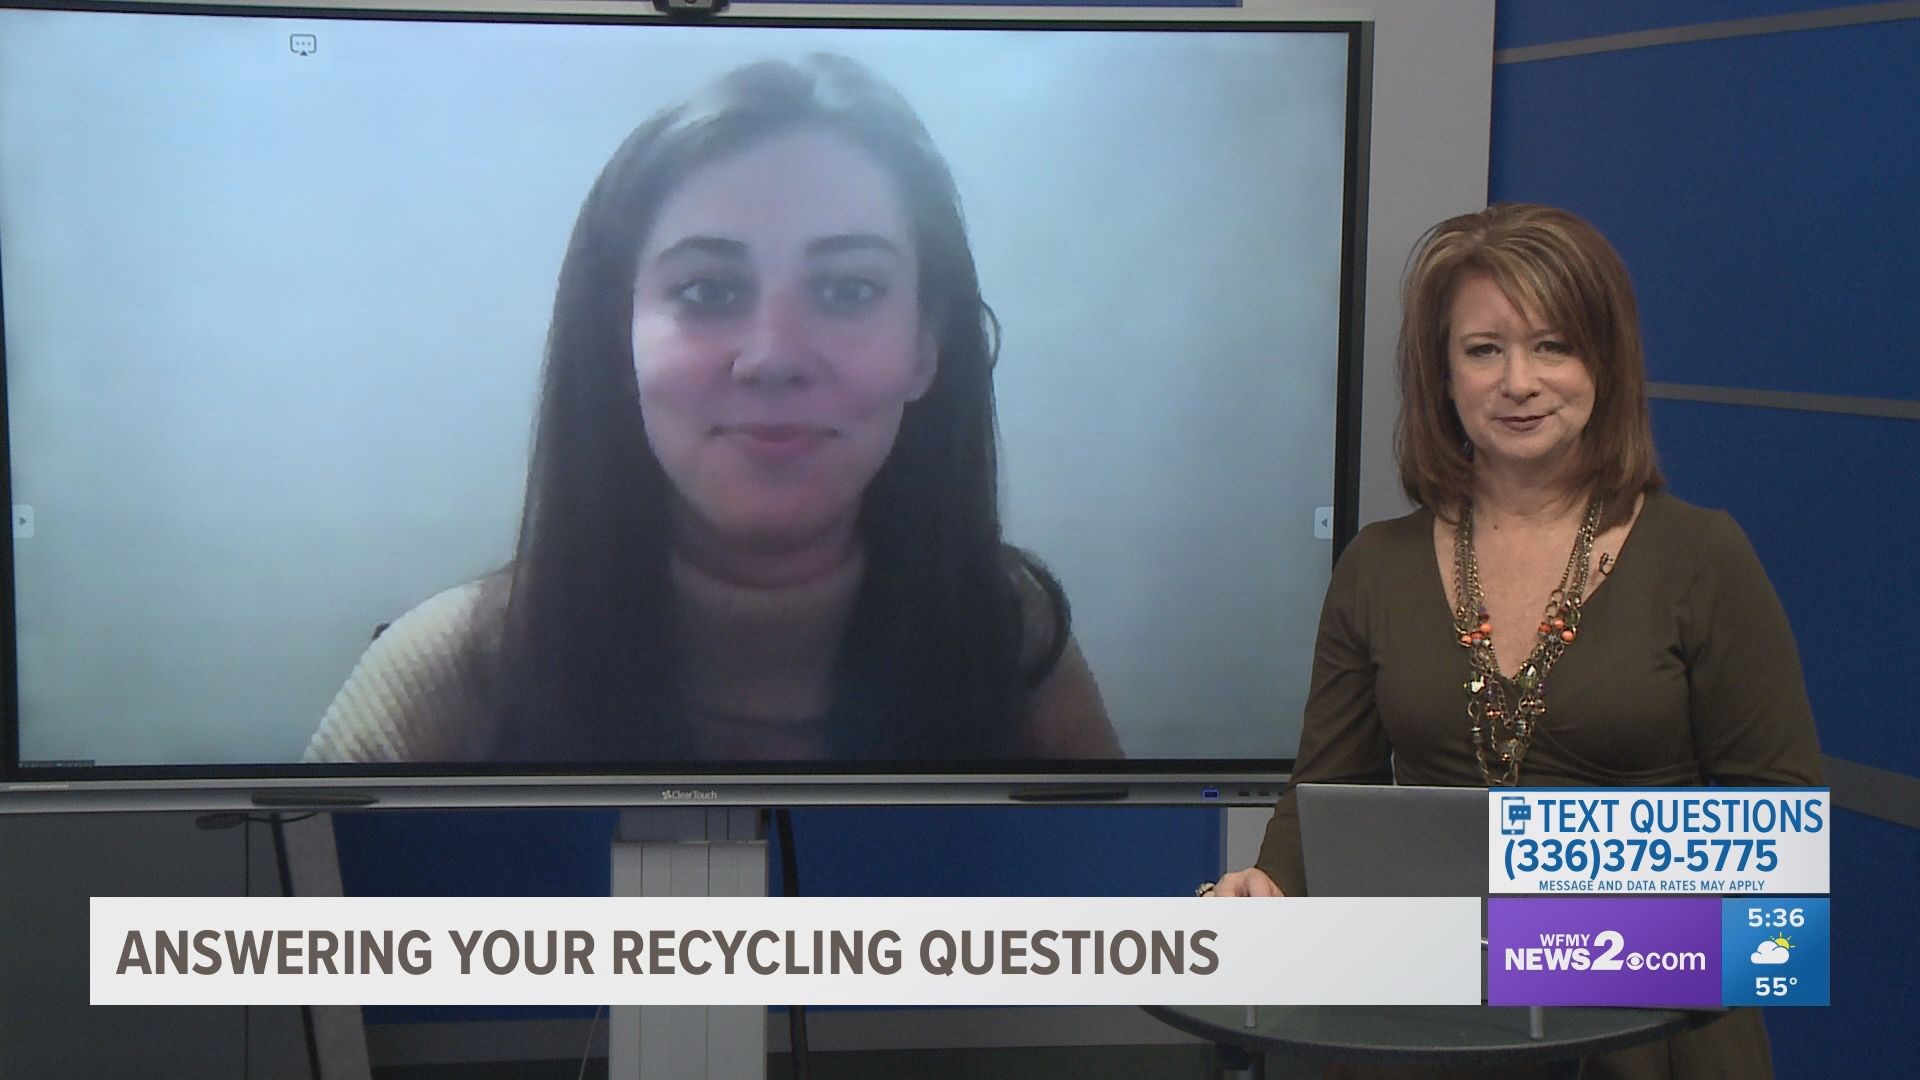 The holidays are now over, now what should you do with all your recycling?